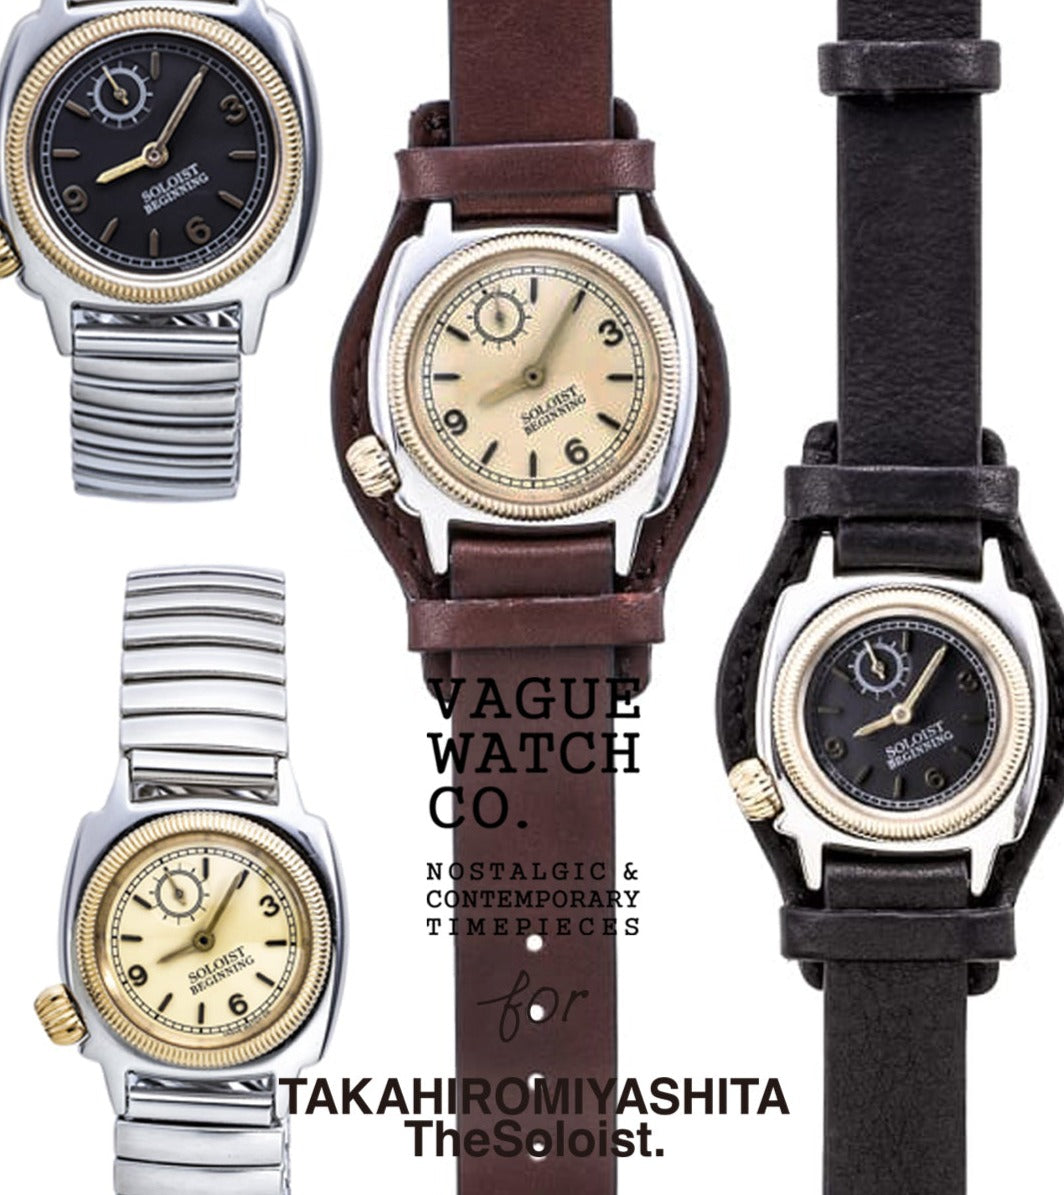 VAGUE WATCH Co.  ヴァーグウォッチカンパニー  – VAGUE WATCH CO.